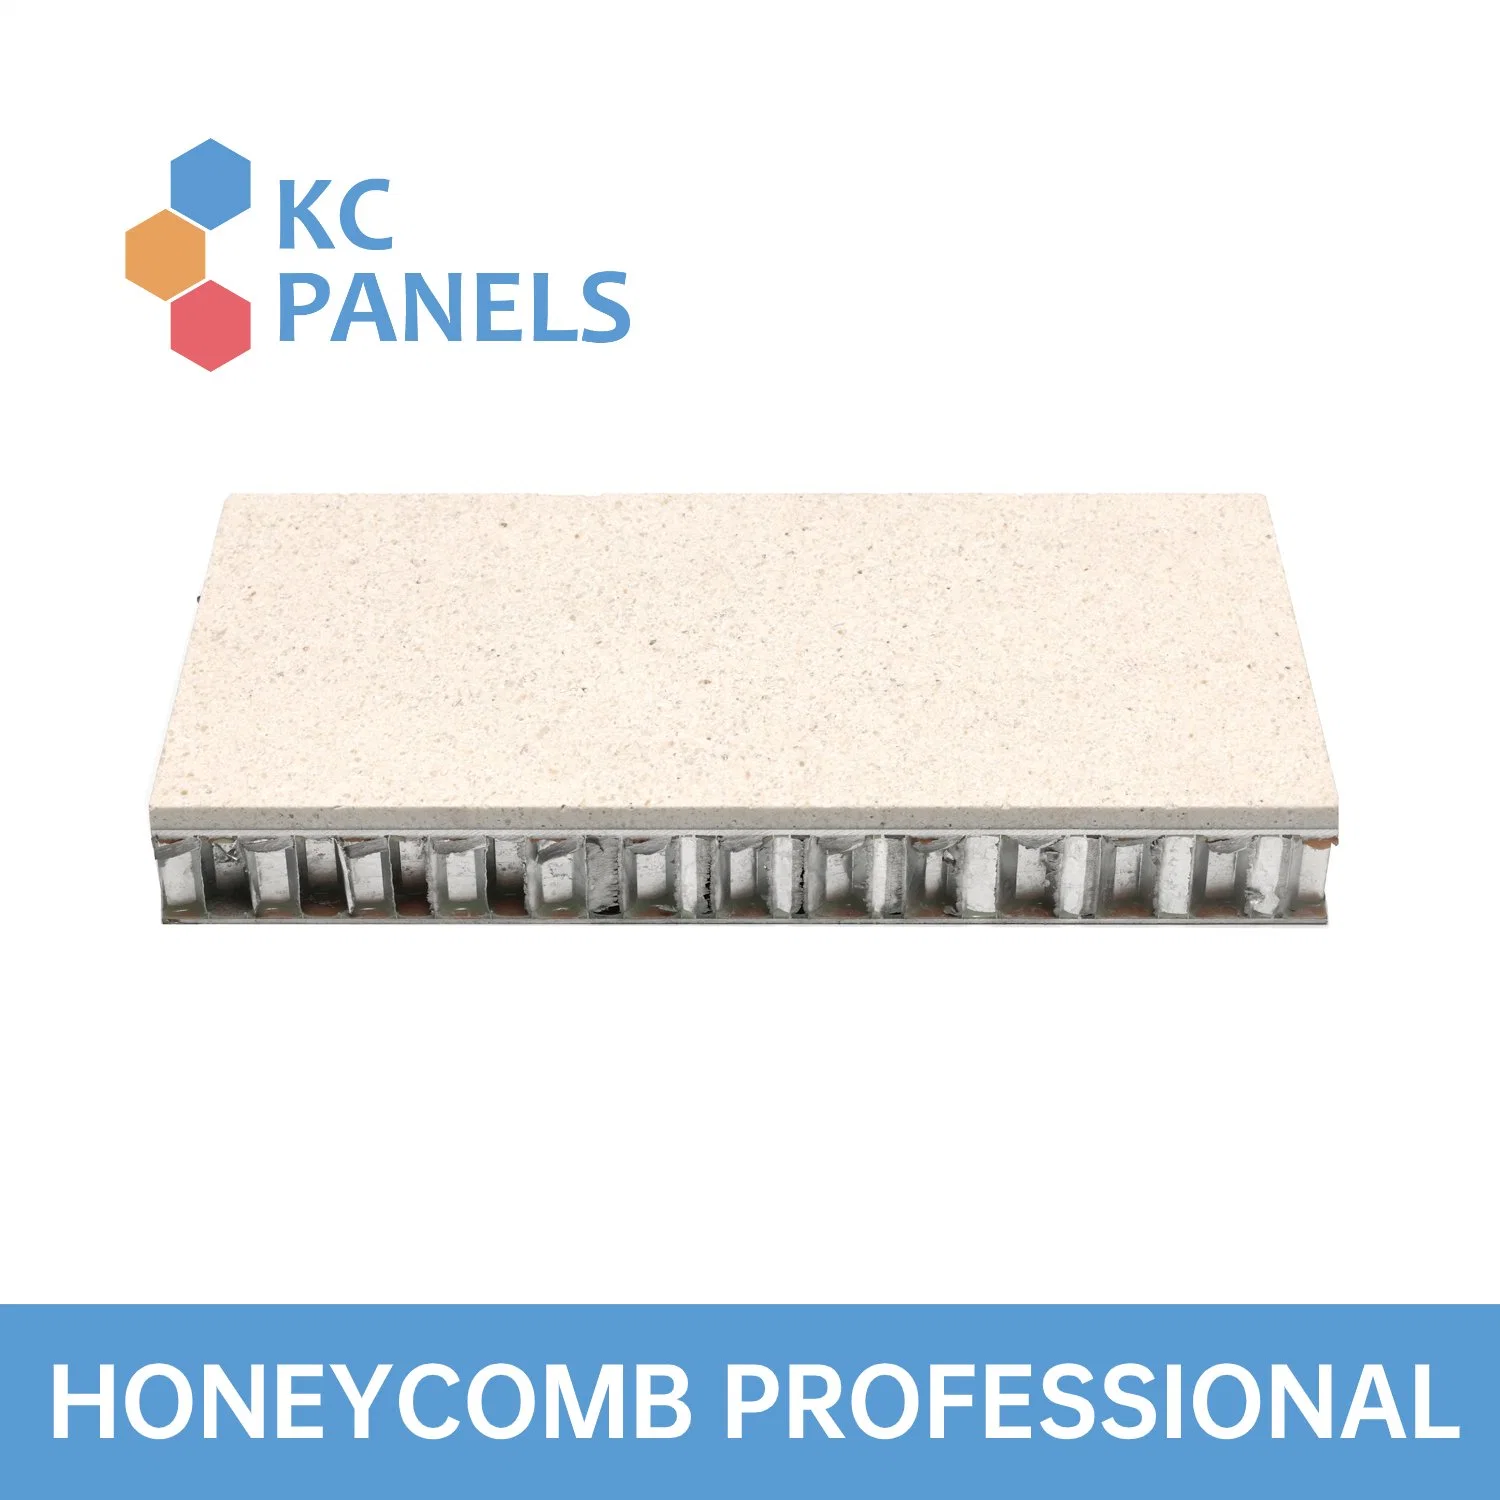 Fire Rated Lightweight Natural Stone Honeycomb Panel for Exterior Cladding Interior Wall Cladding Panel